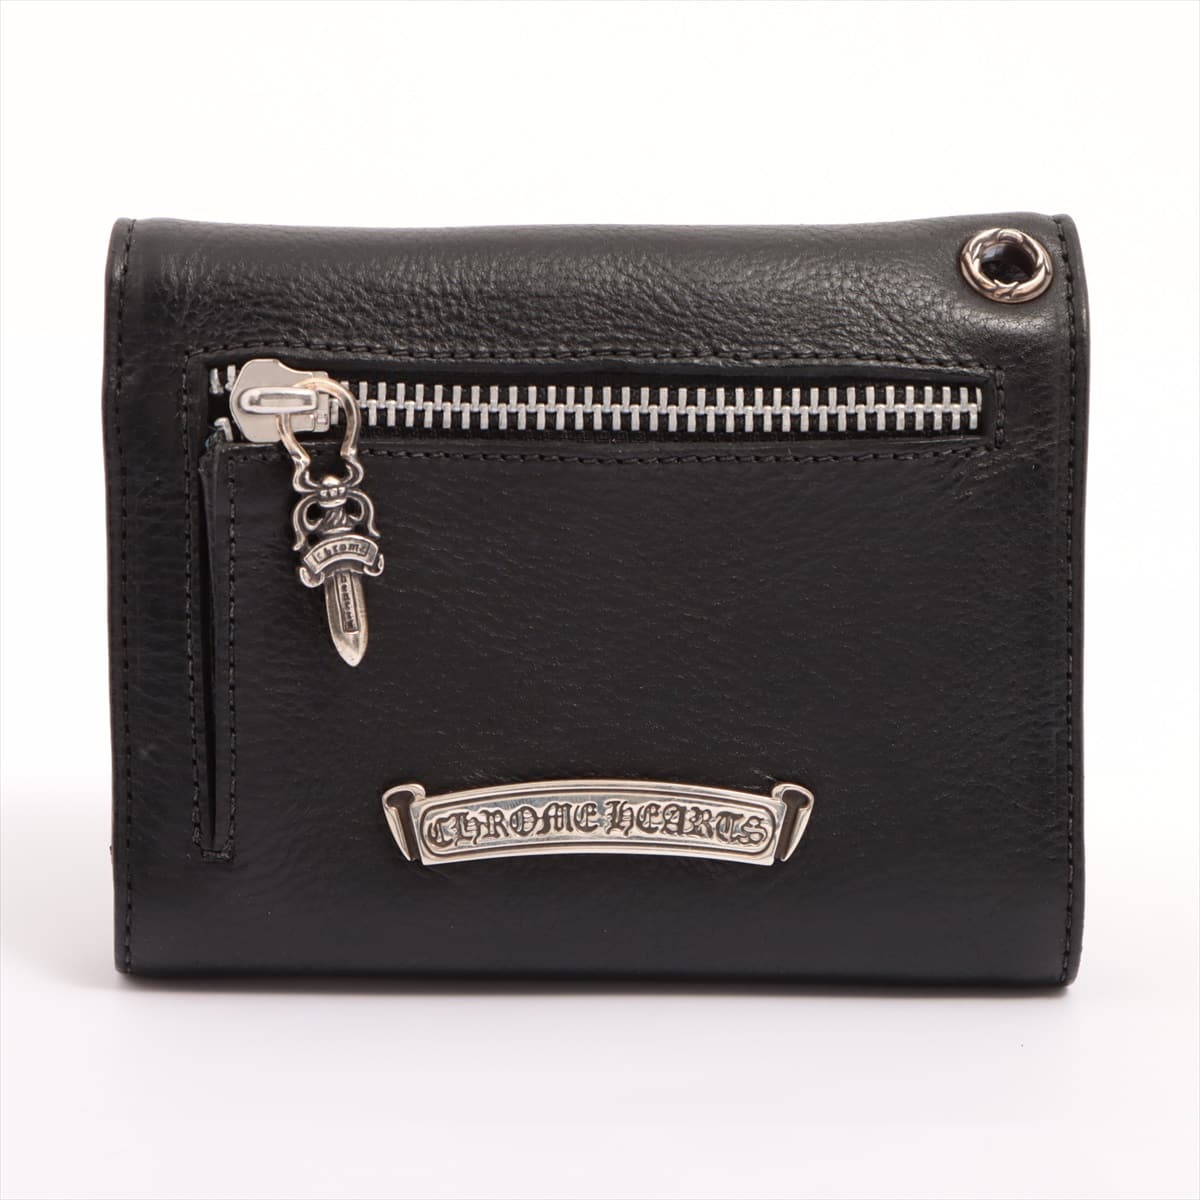 Chrome Hearts Wave Wallet Mini Wallet Leather With invoice